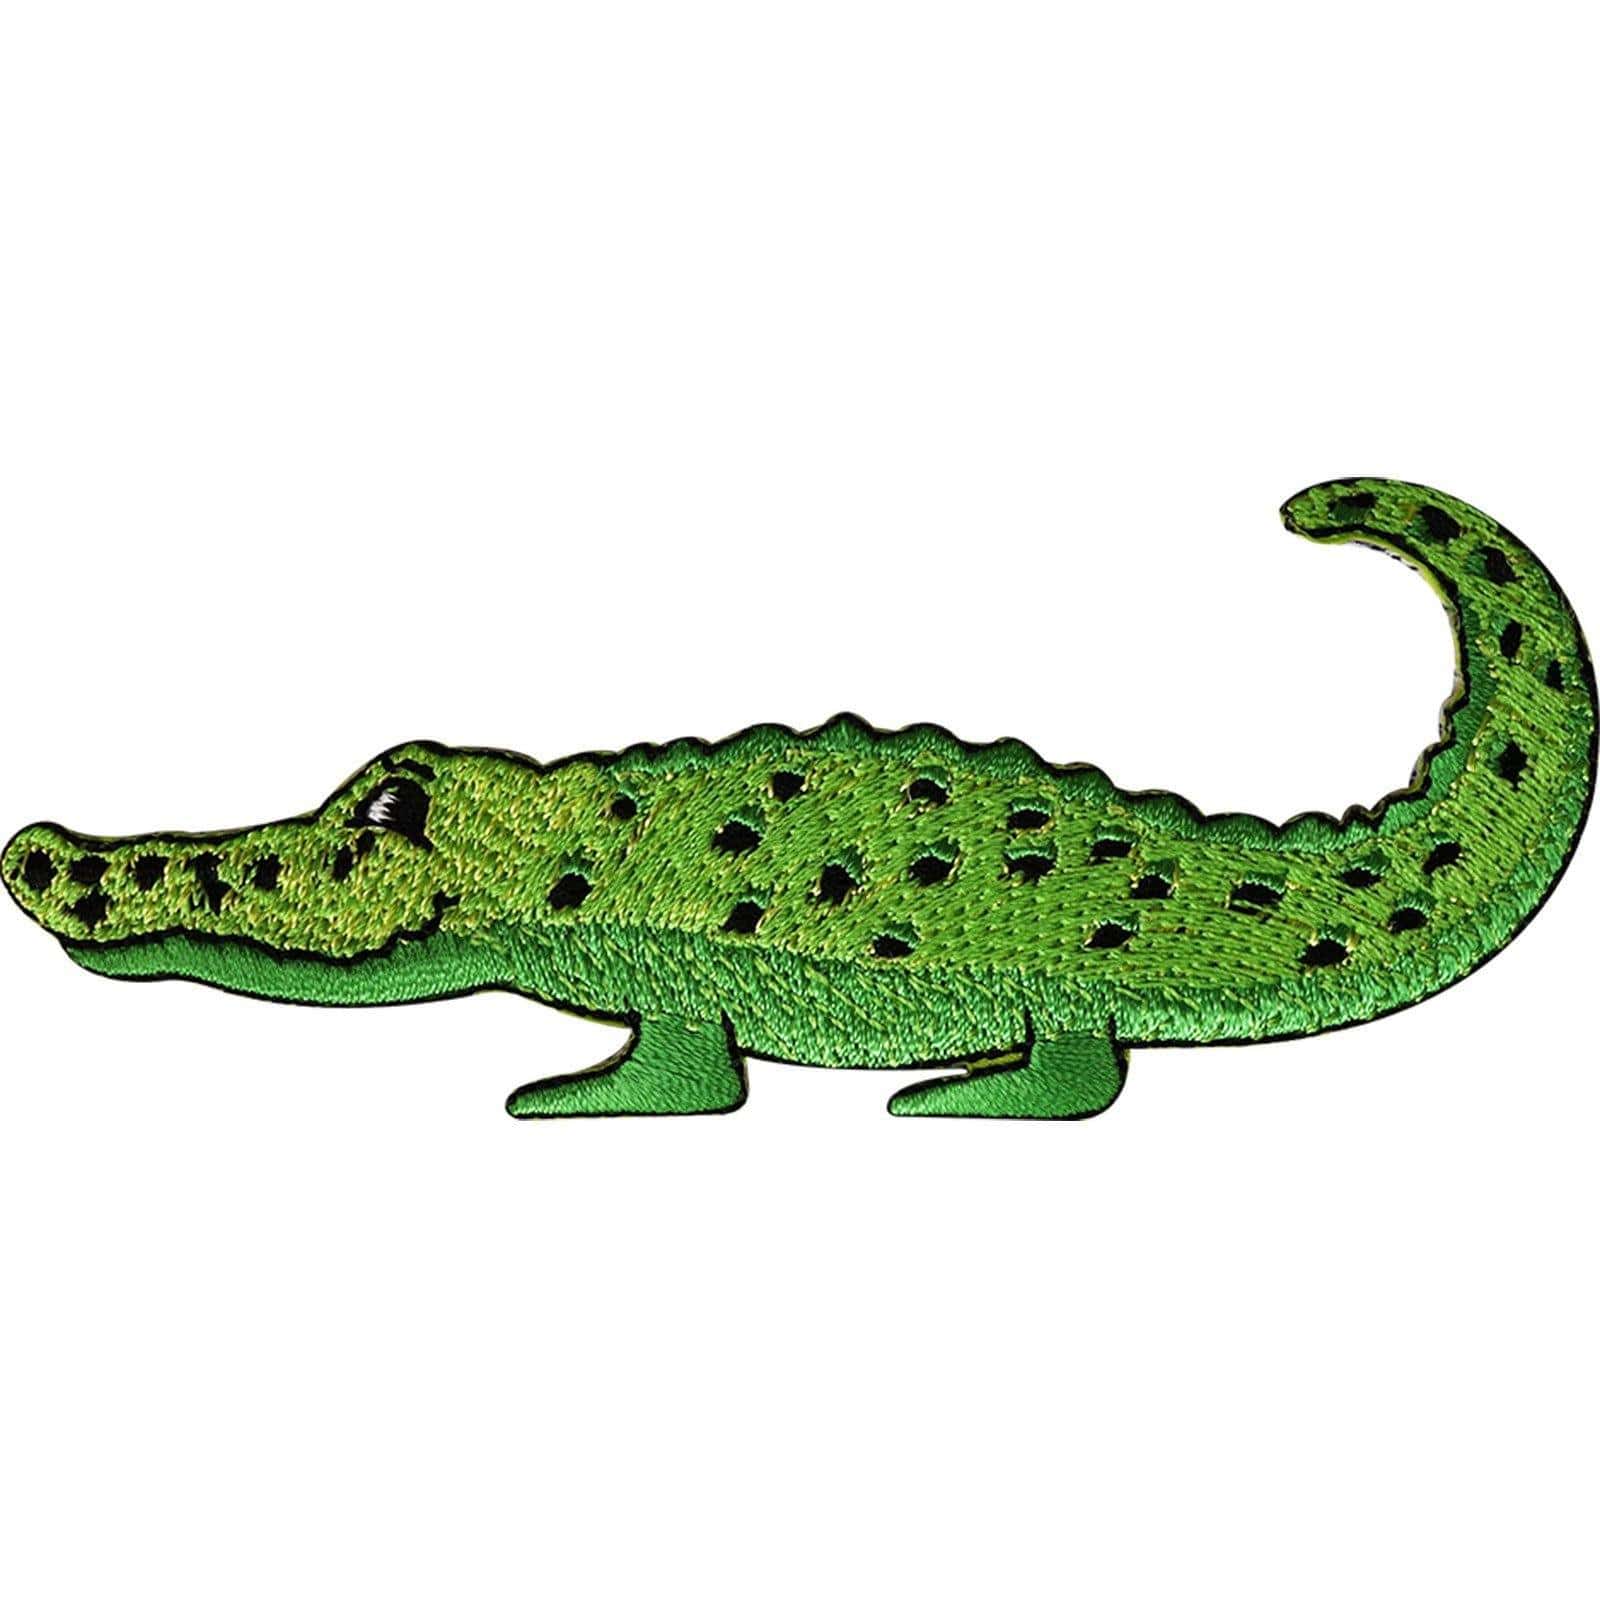 Alligator Crocodile Patch Iron Sew On Clothes Embroidered Badge Animal Applique